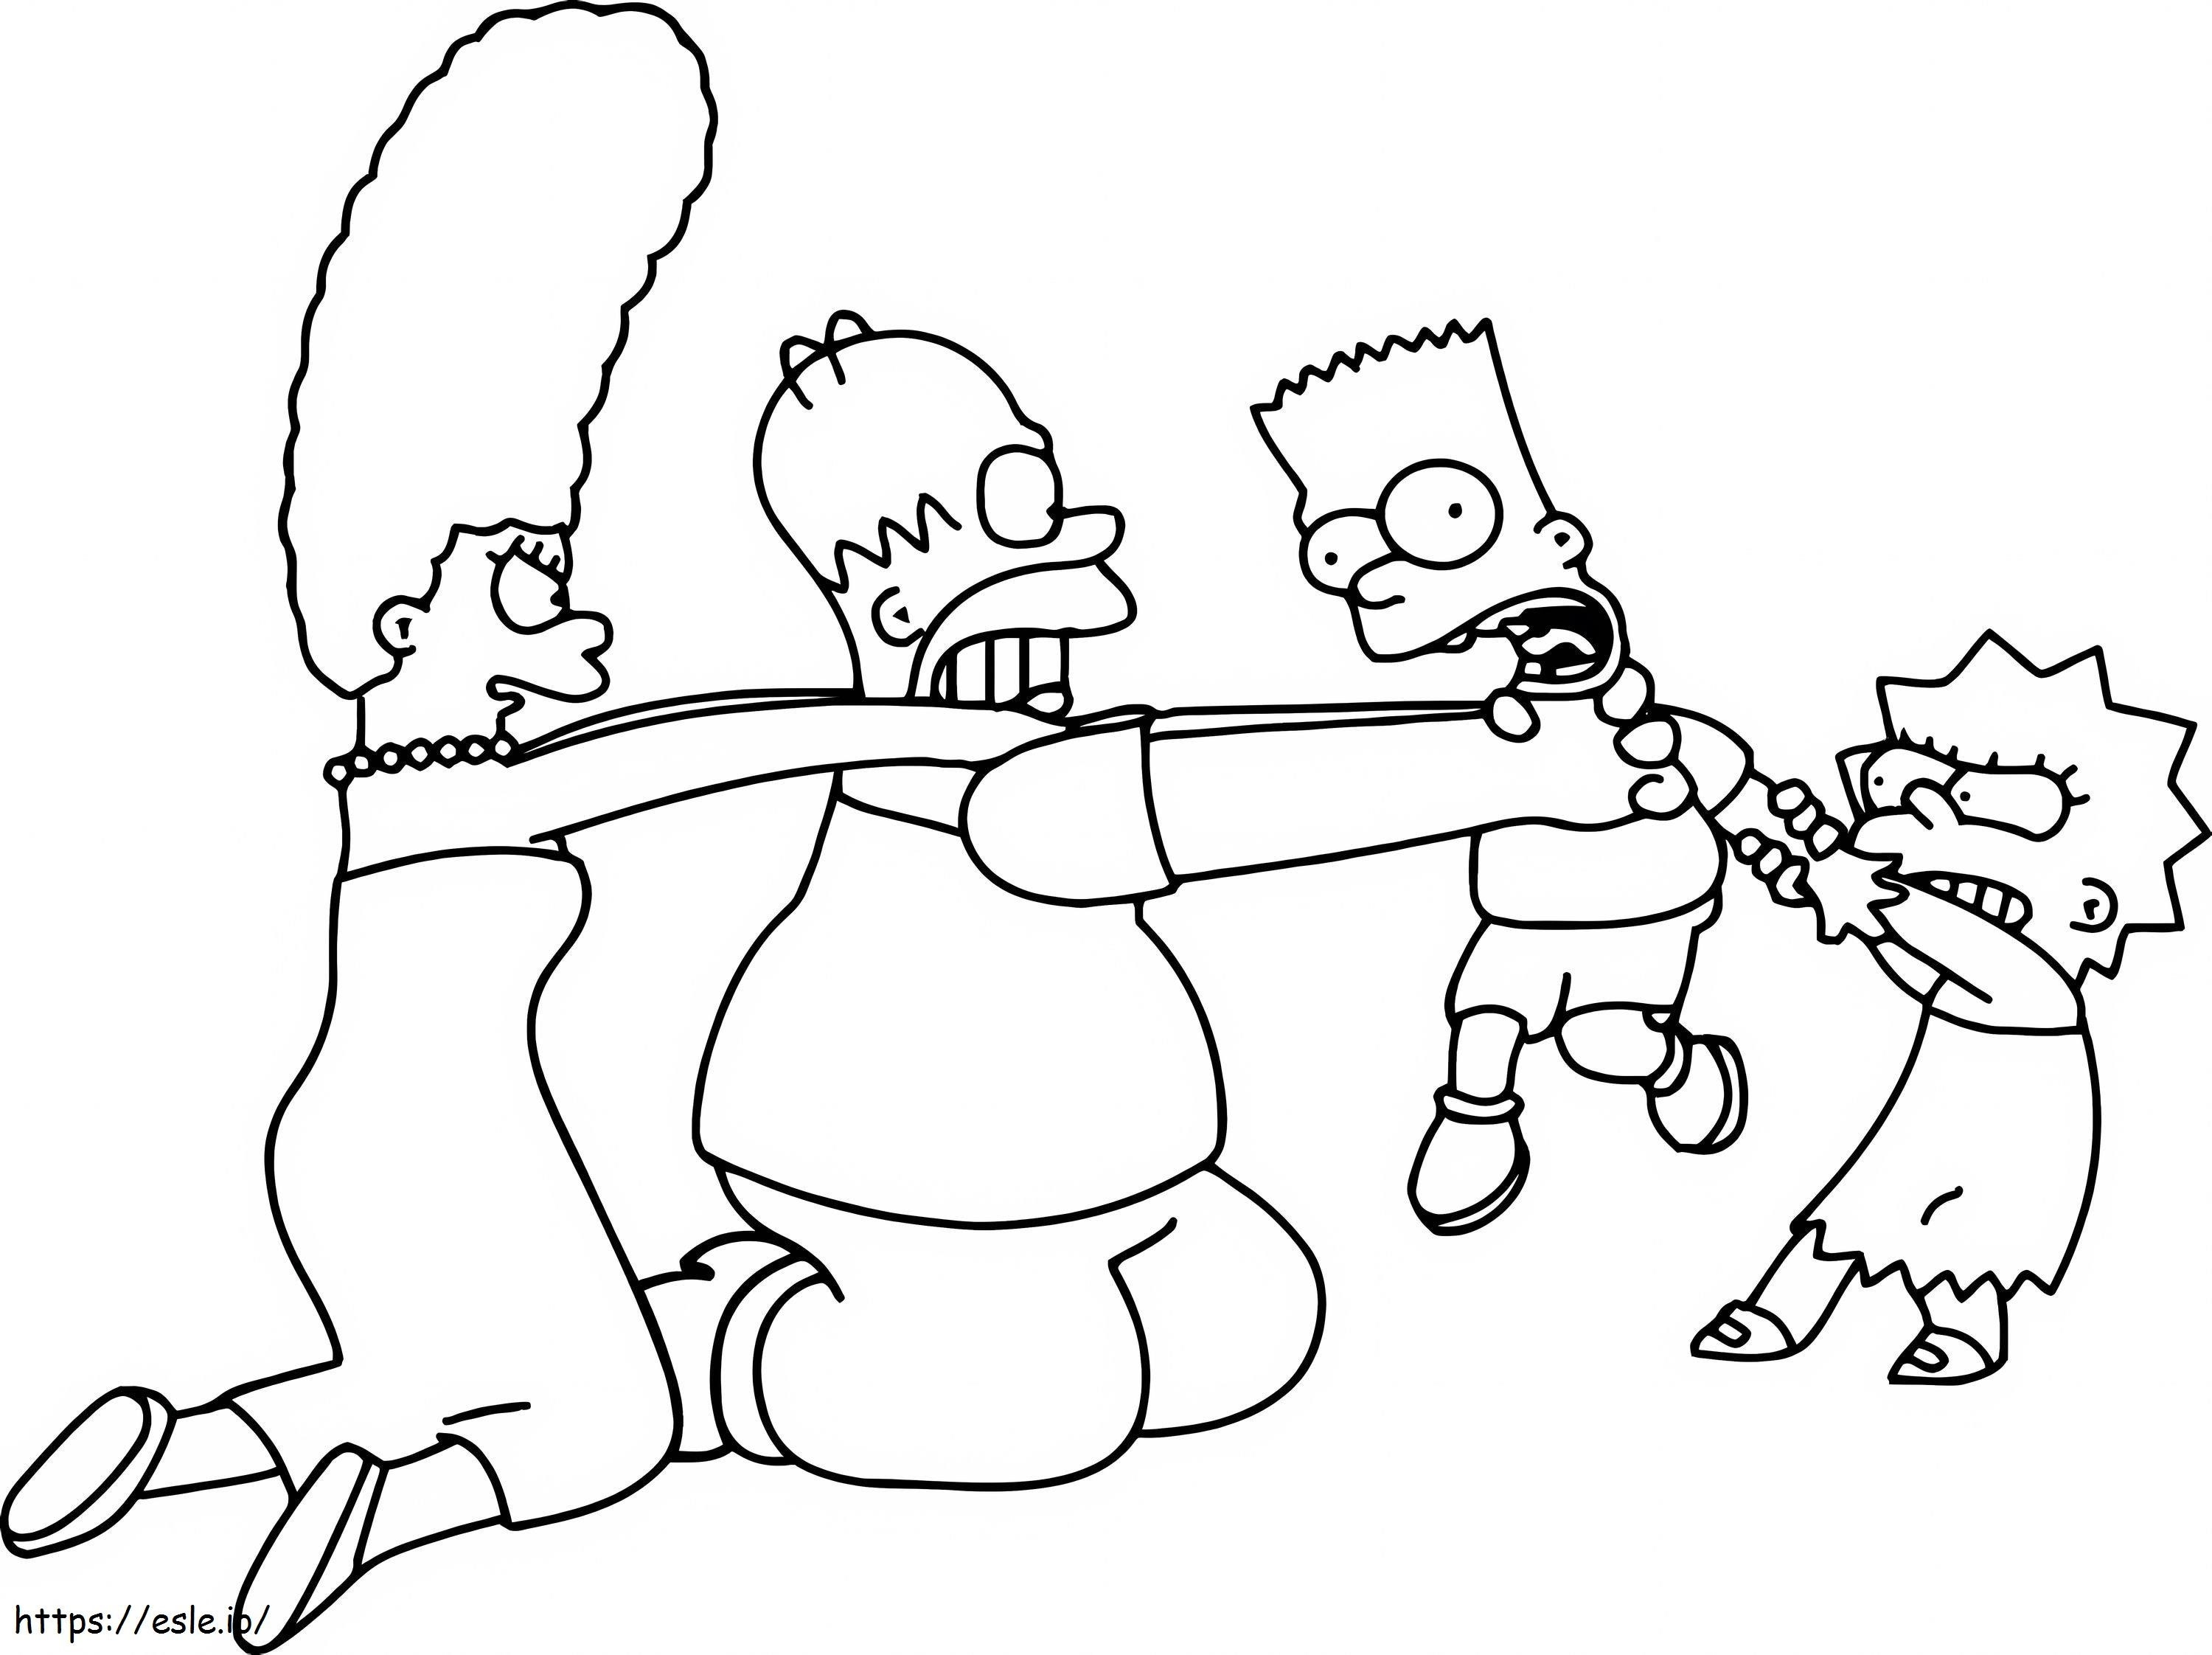 The Simpsons Family Having Fun coloring page